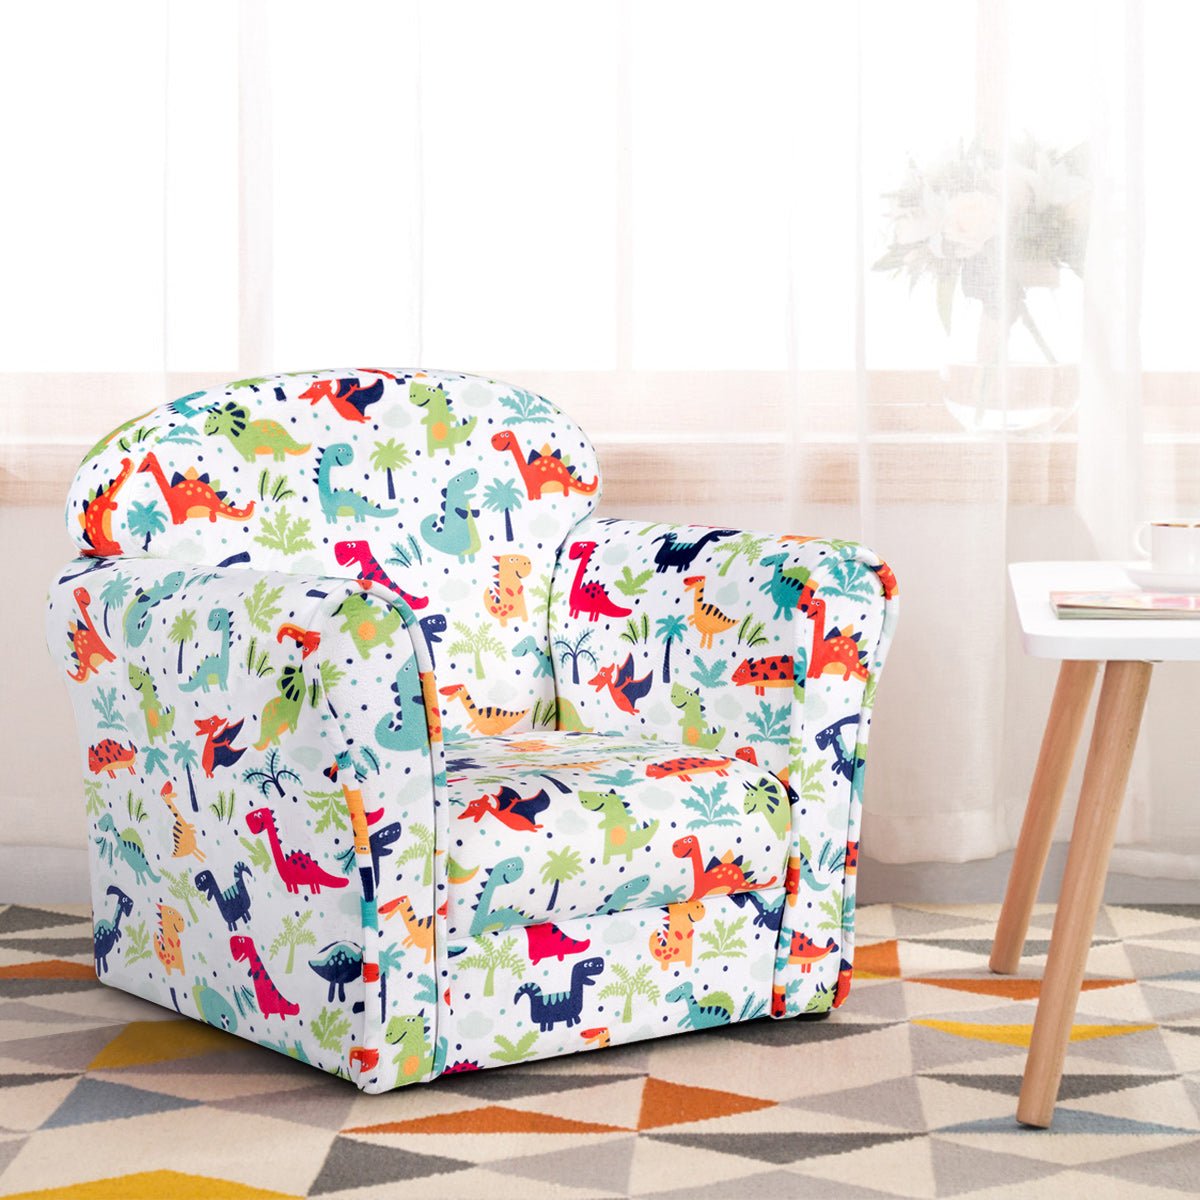 Velvet Kids Sofa with Sweet Pattern: Soft Seating for Baby's Space